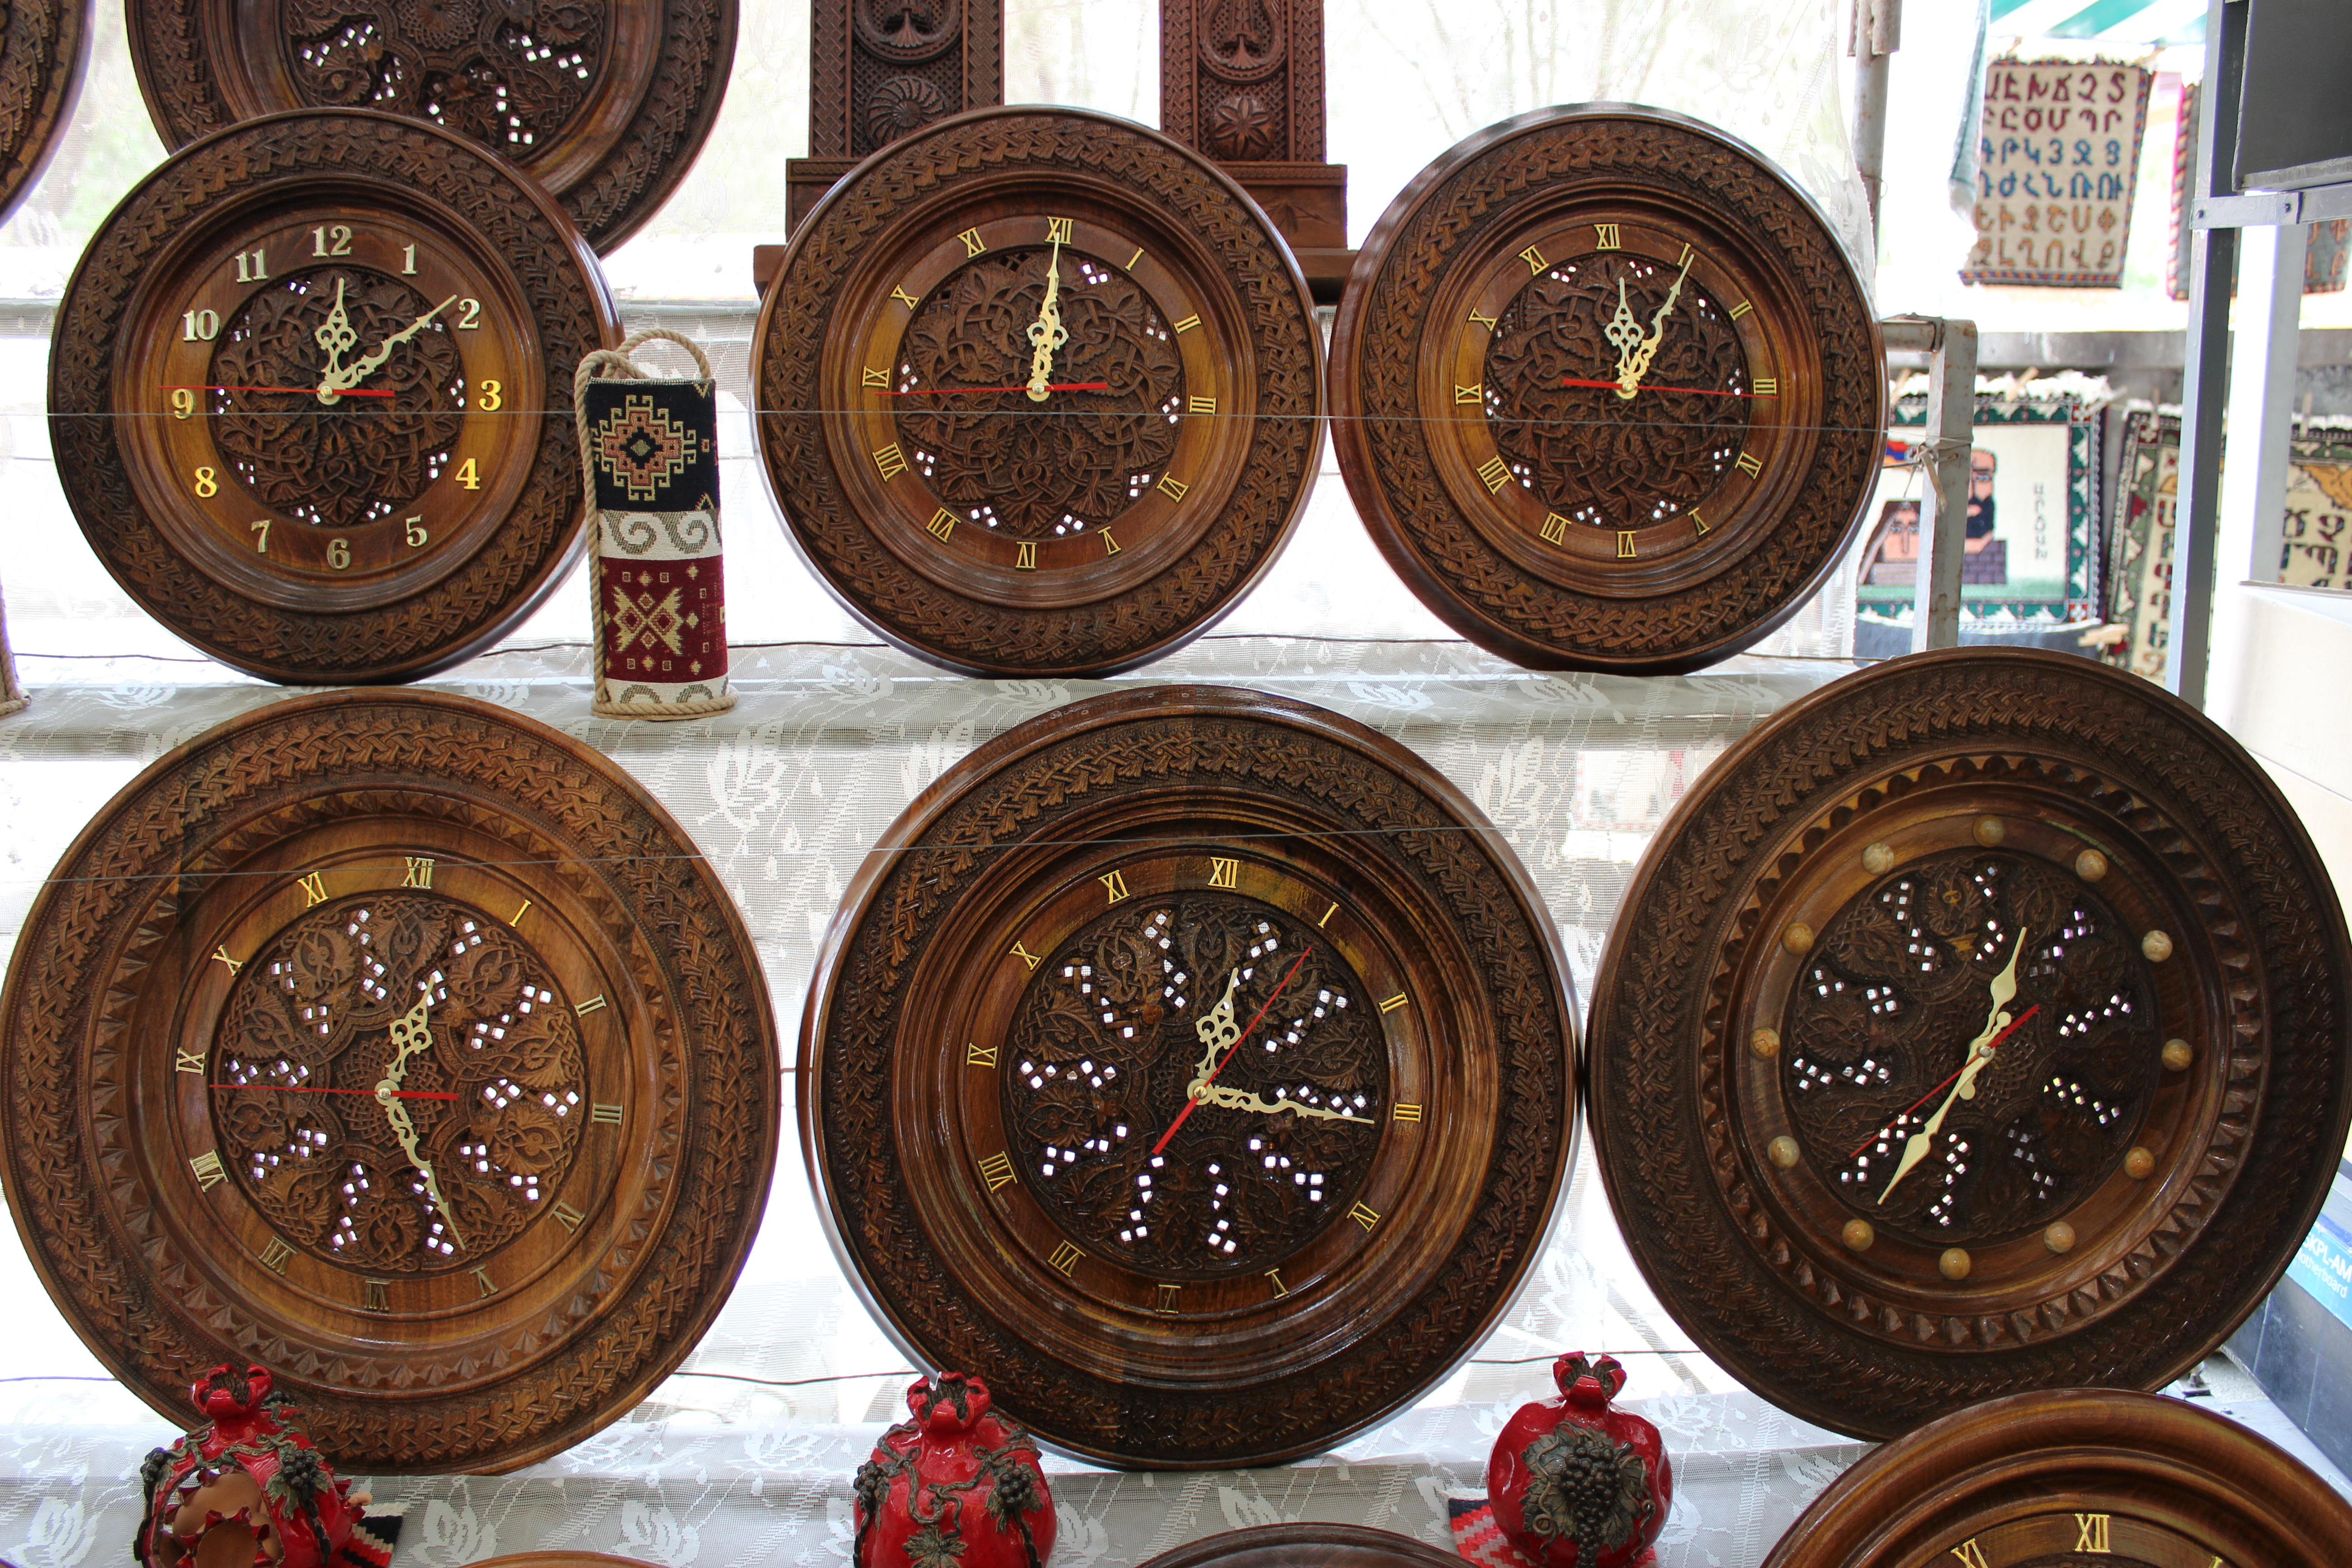 Another example of amazing carving work - beautiful wall clock.